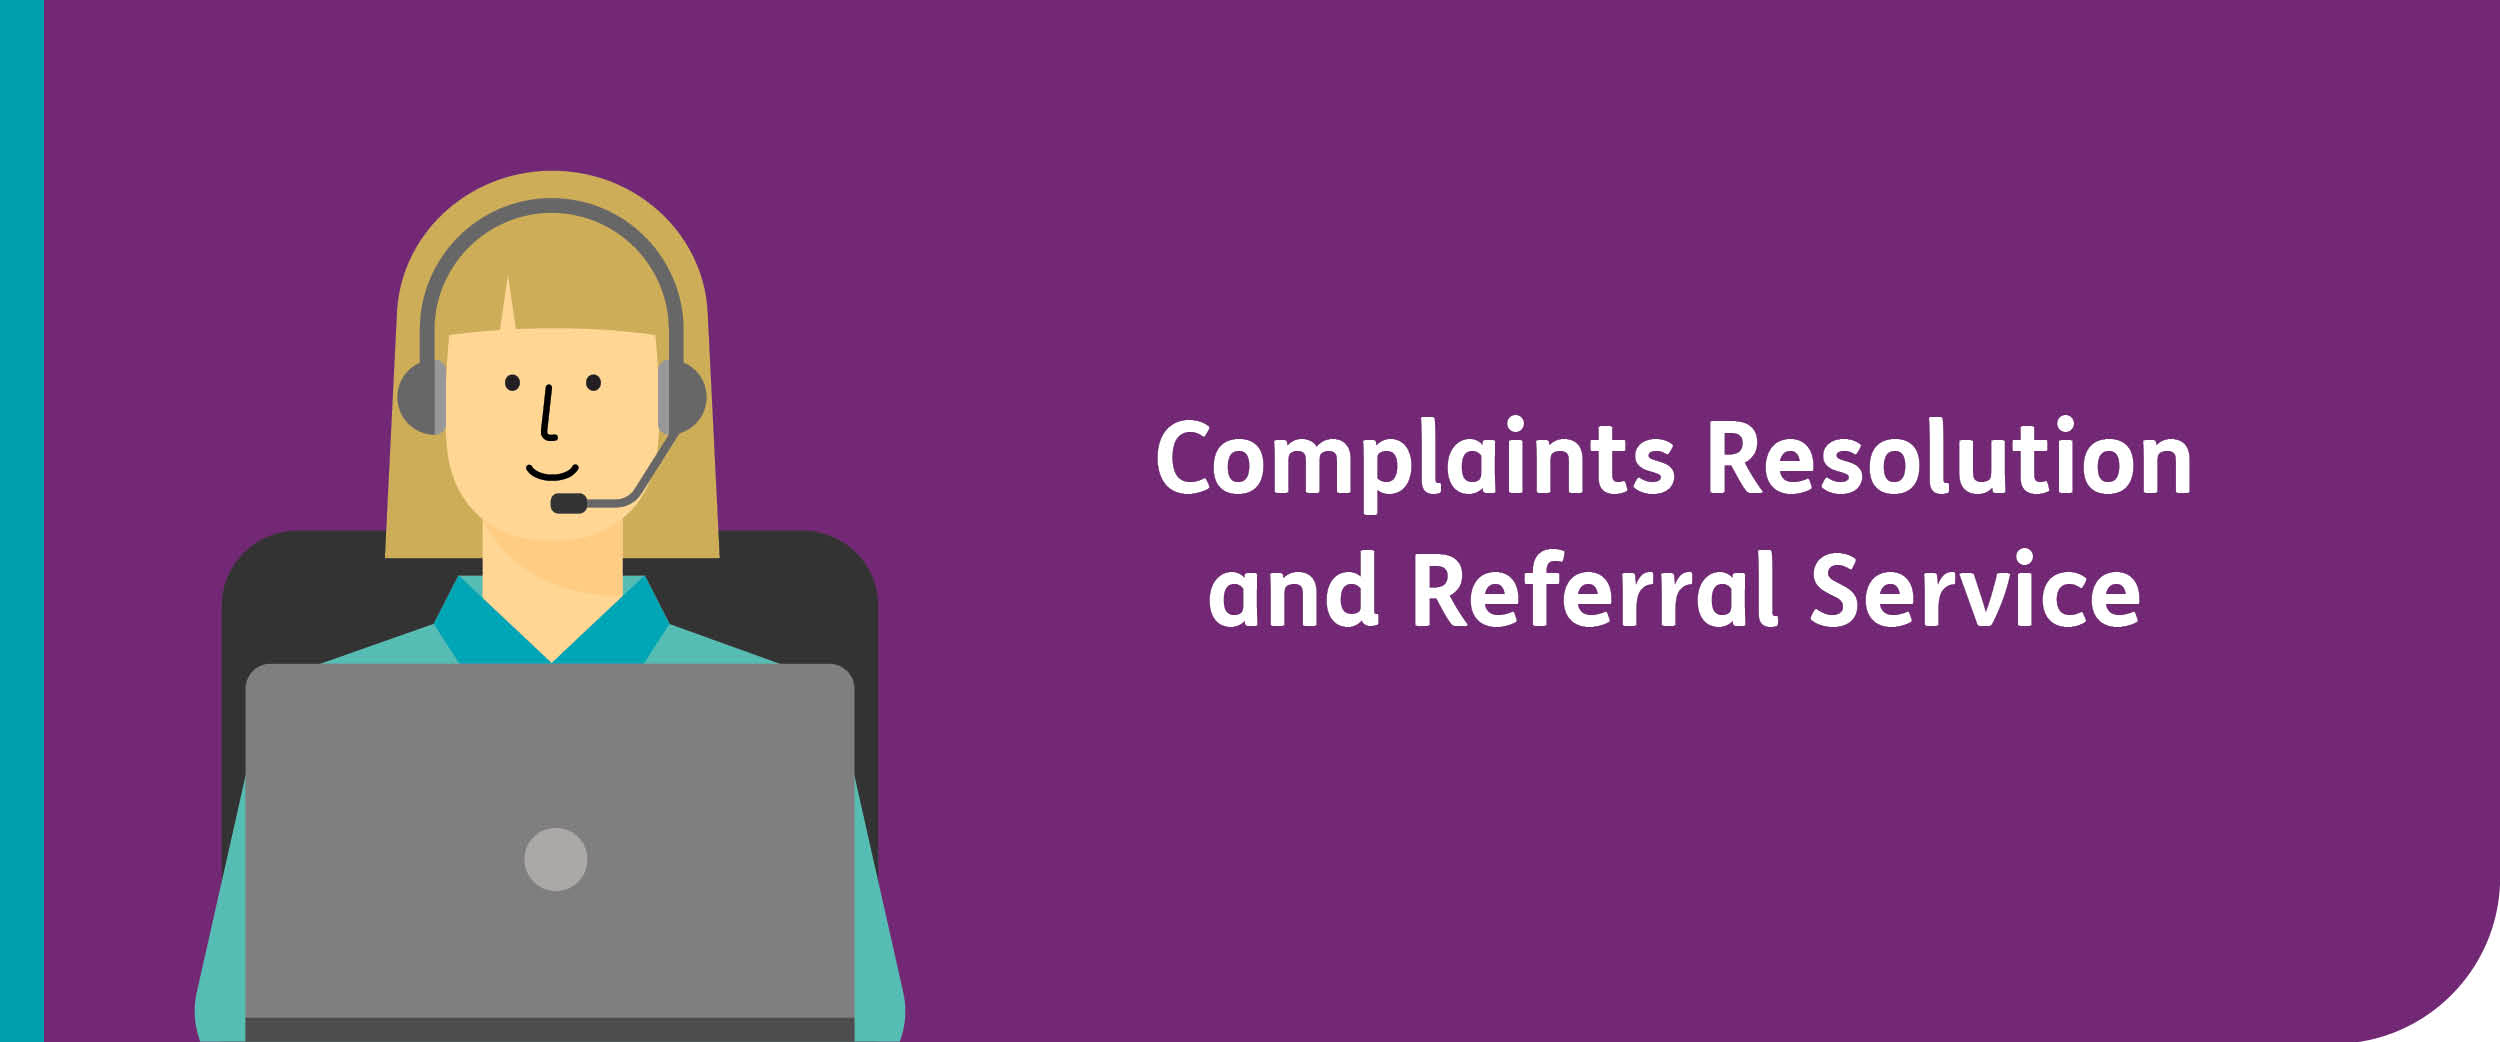 Complaints Resolution and Referral Service with a cartoon of a person using a laptop and wearing a headset